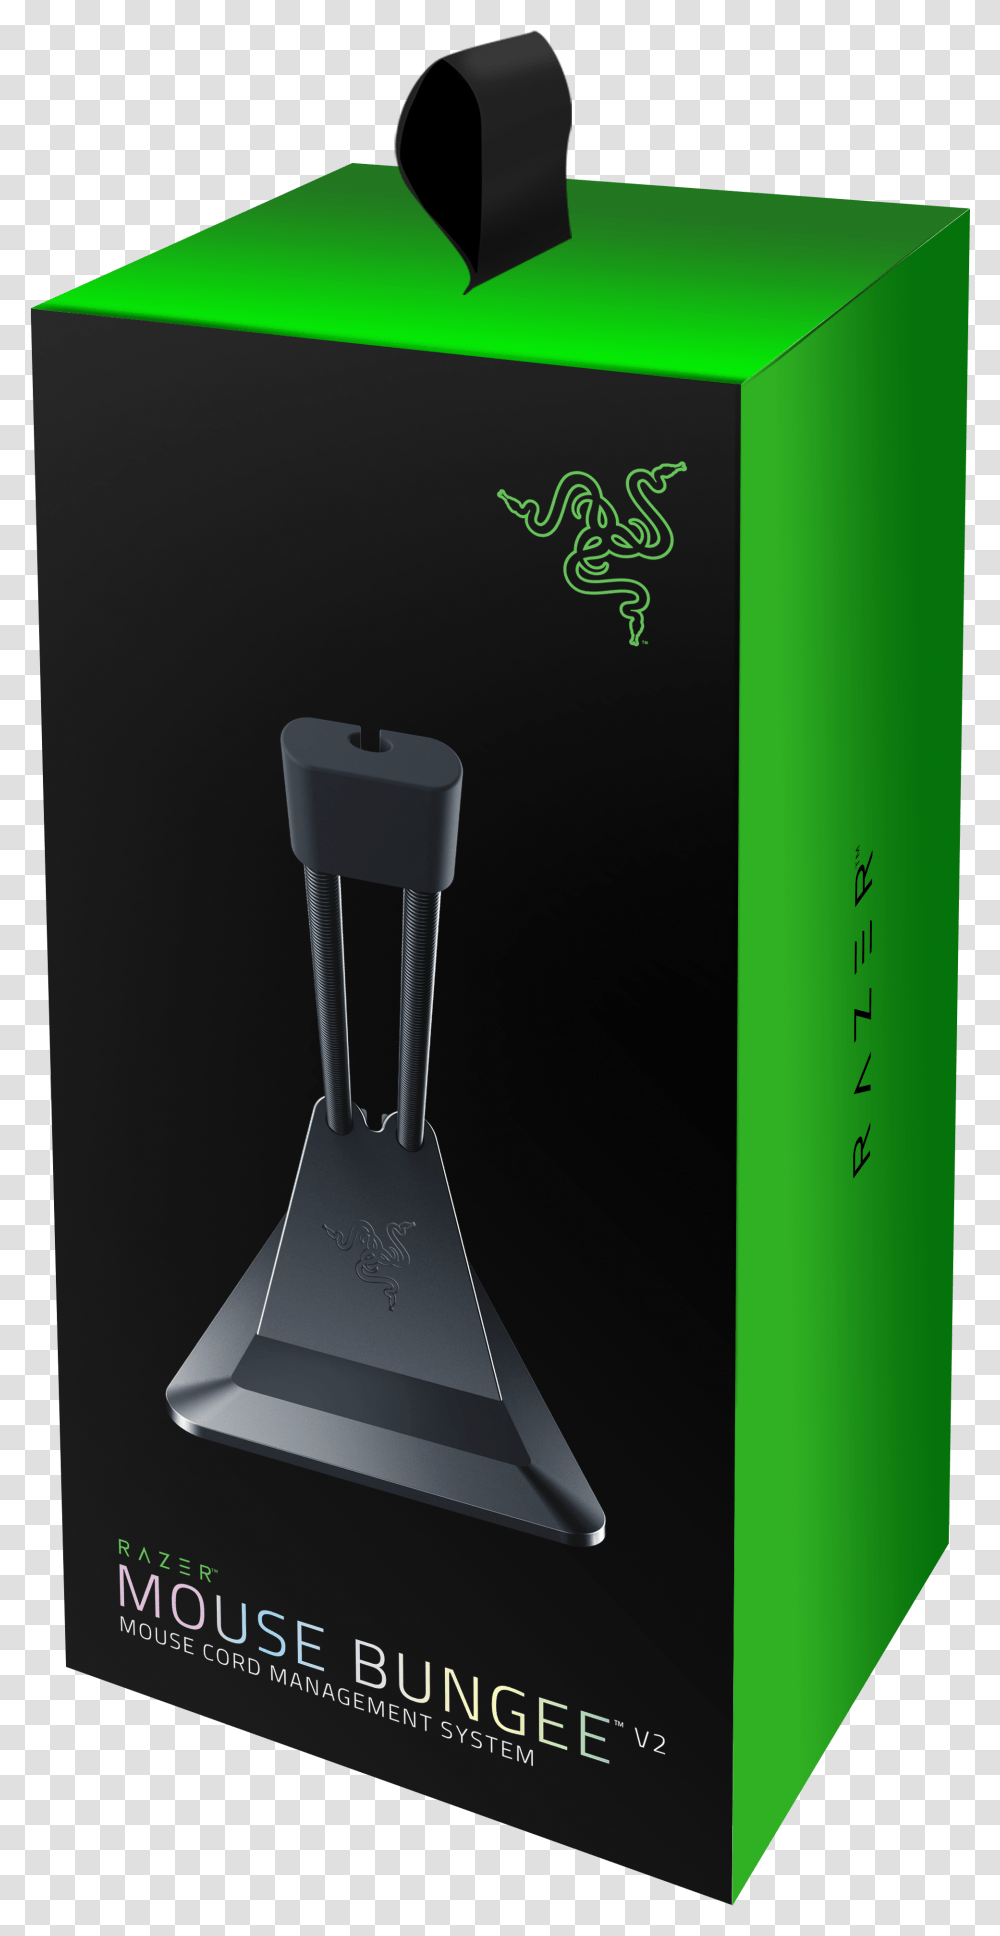 Razer Mouse Bungee V2 Packaging, Appliance, Scale, Machine, Advertisement Transparent Png